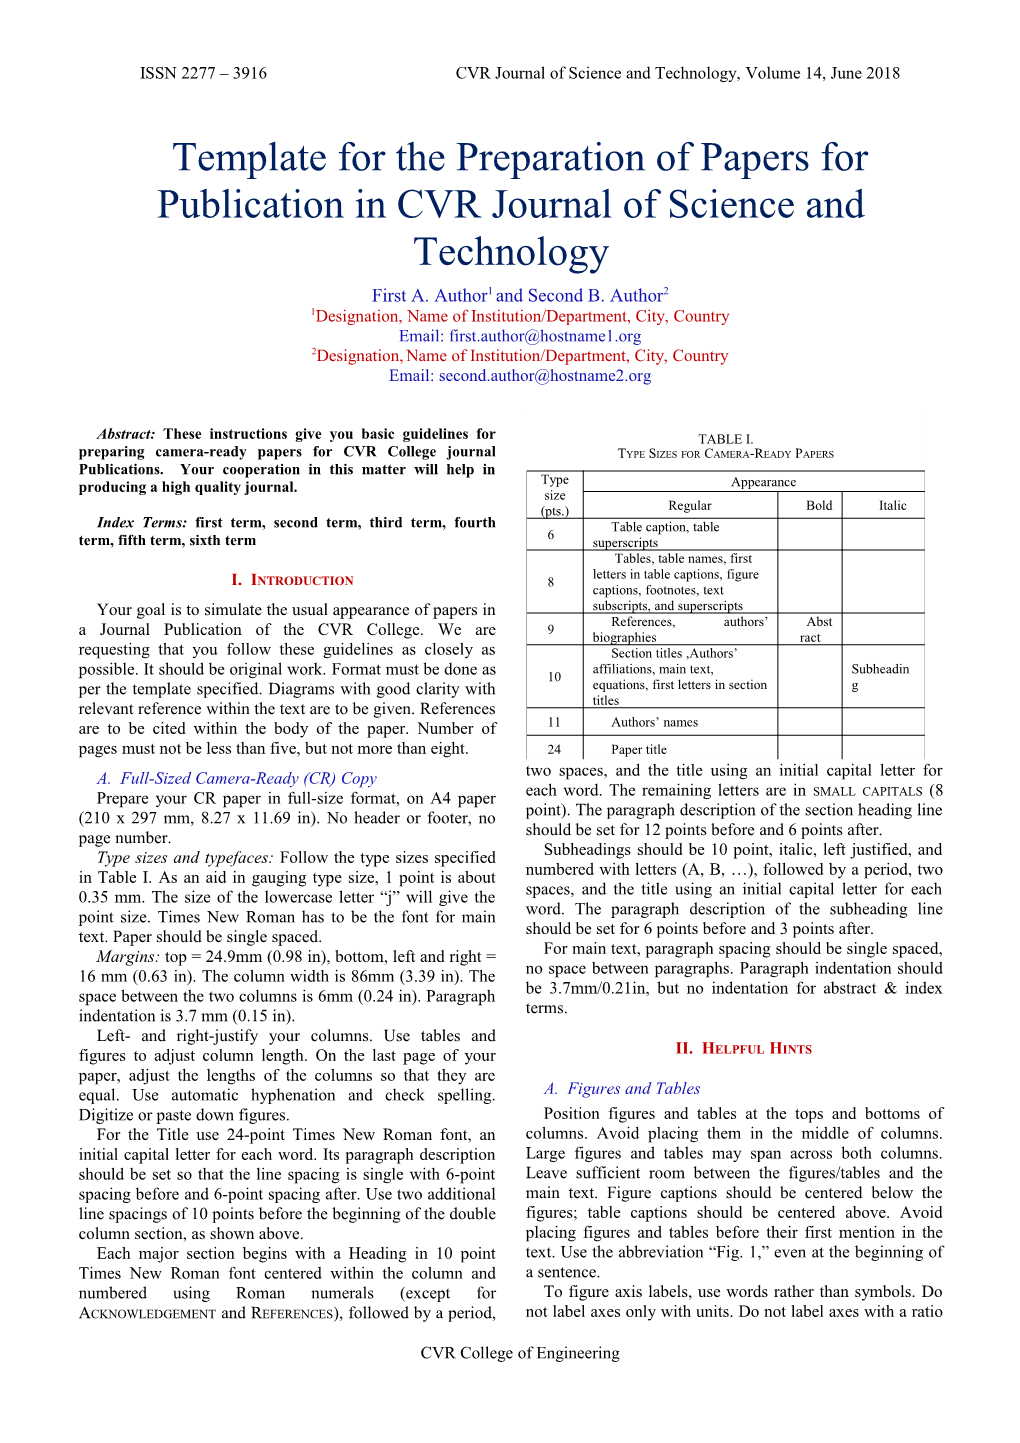 ISSN 2277 3916 CVR Journal of Science and Technology, Volume 14, June 2018